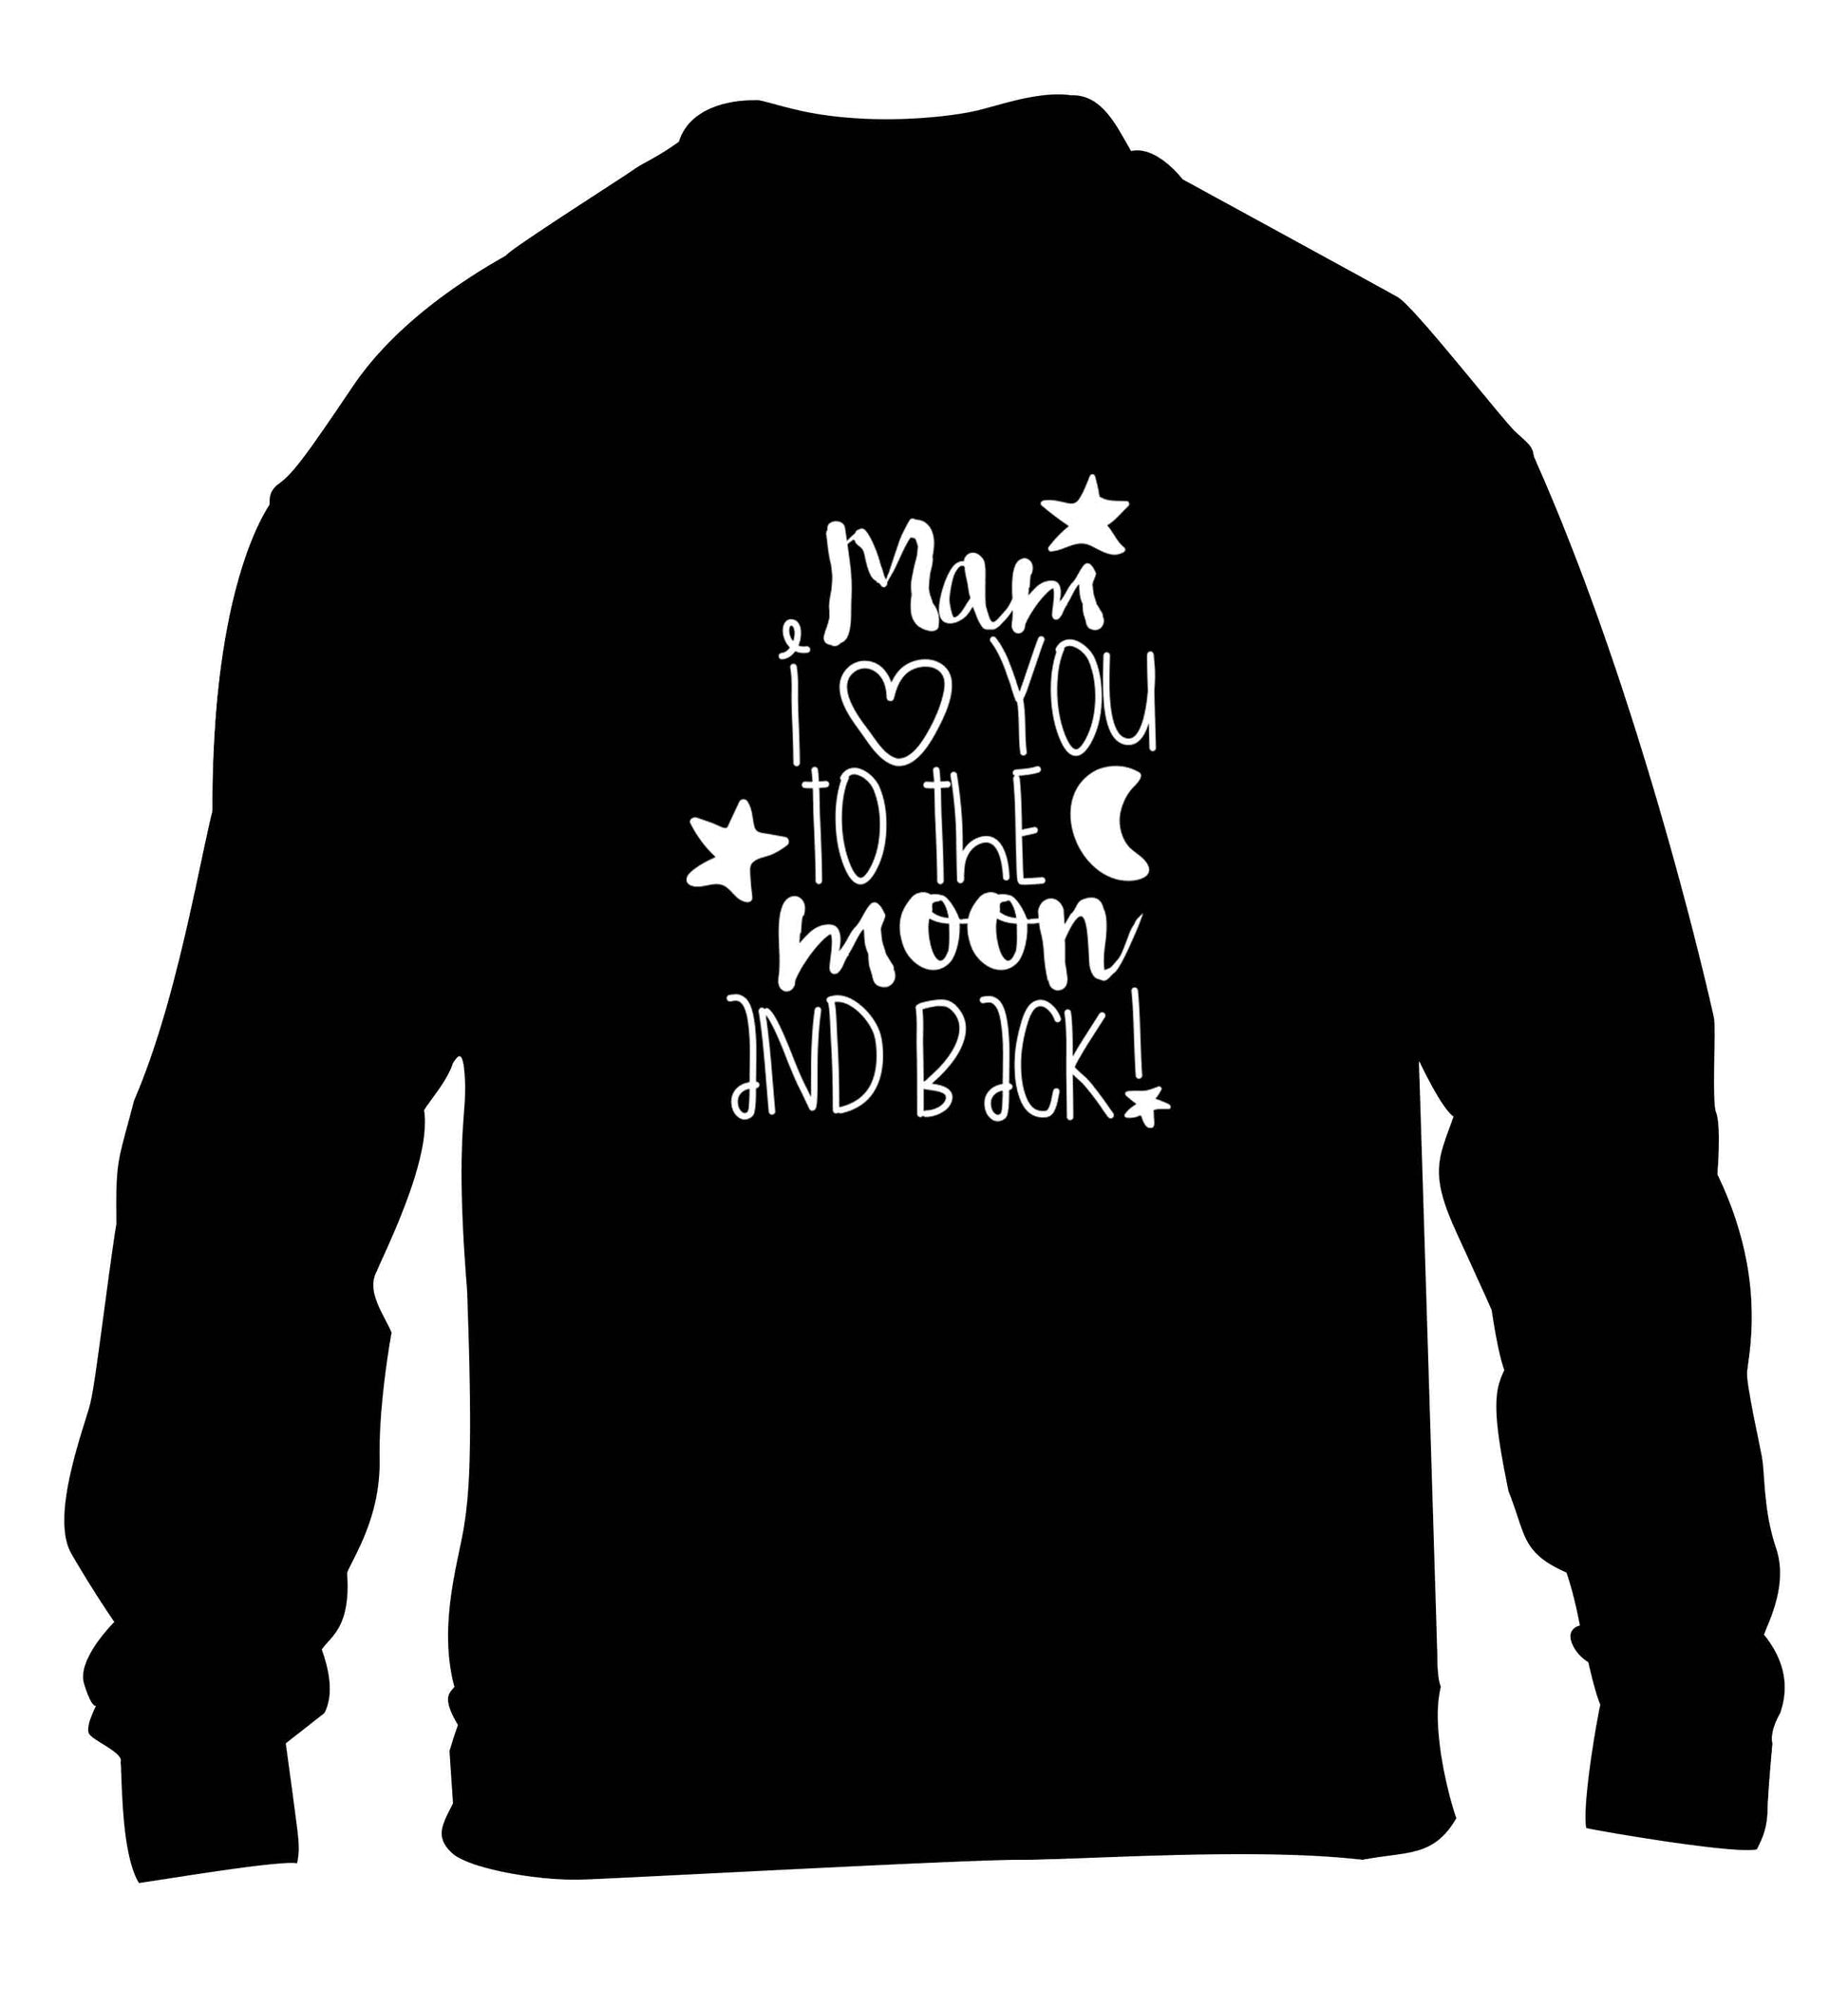 Mam I love you to the moon and back children's black sweater 12-13 Years